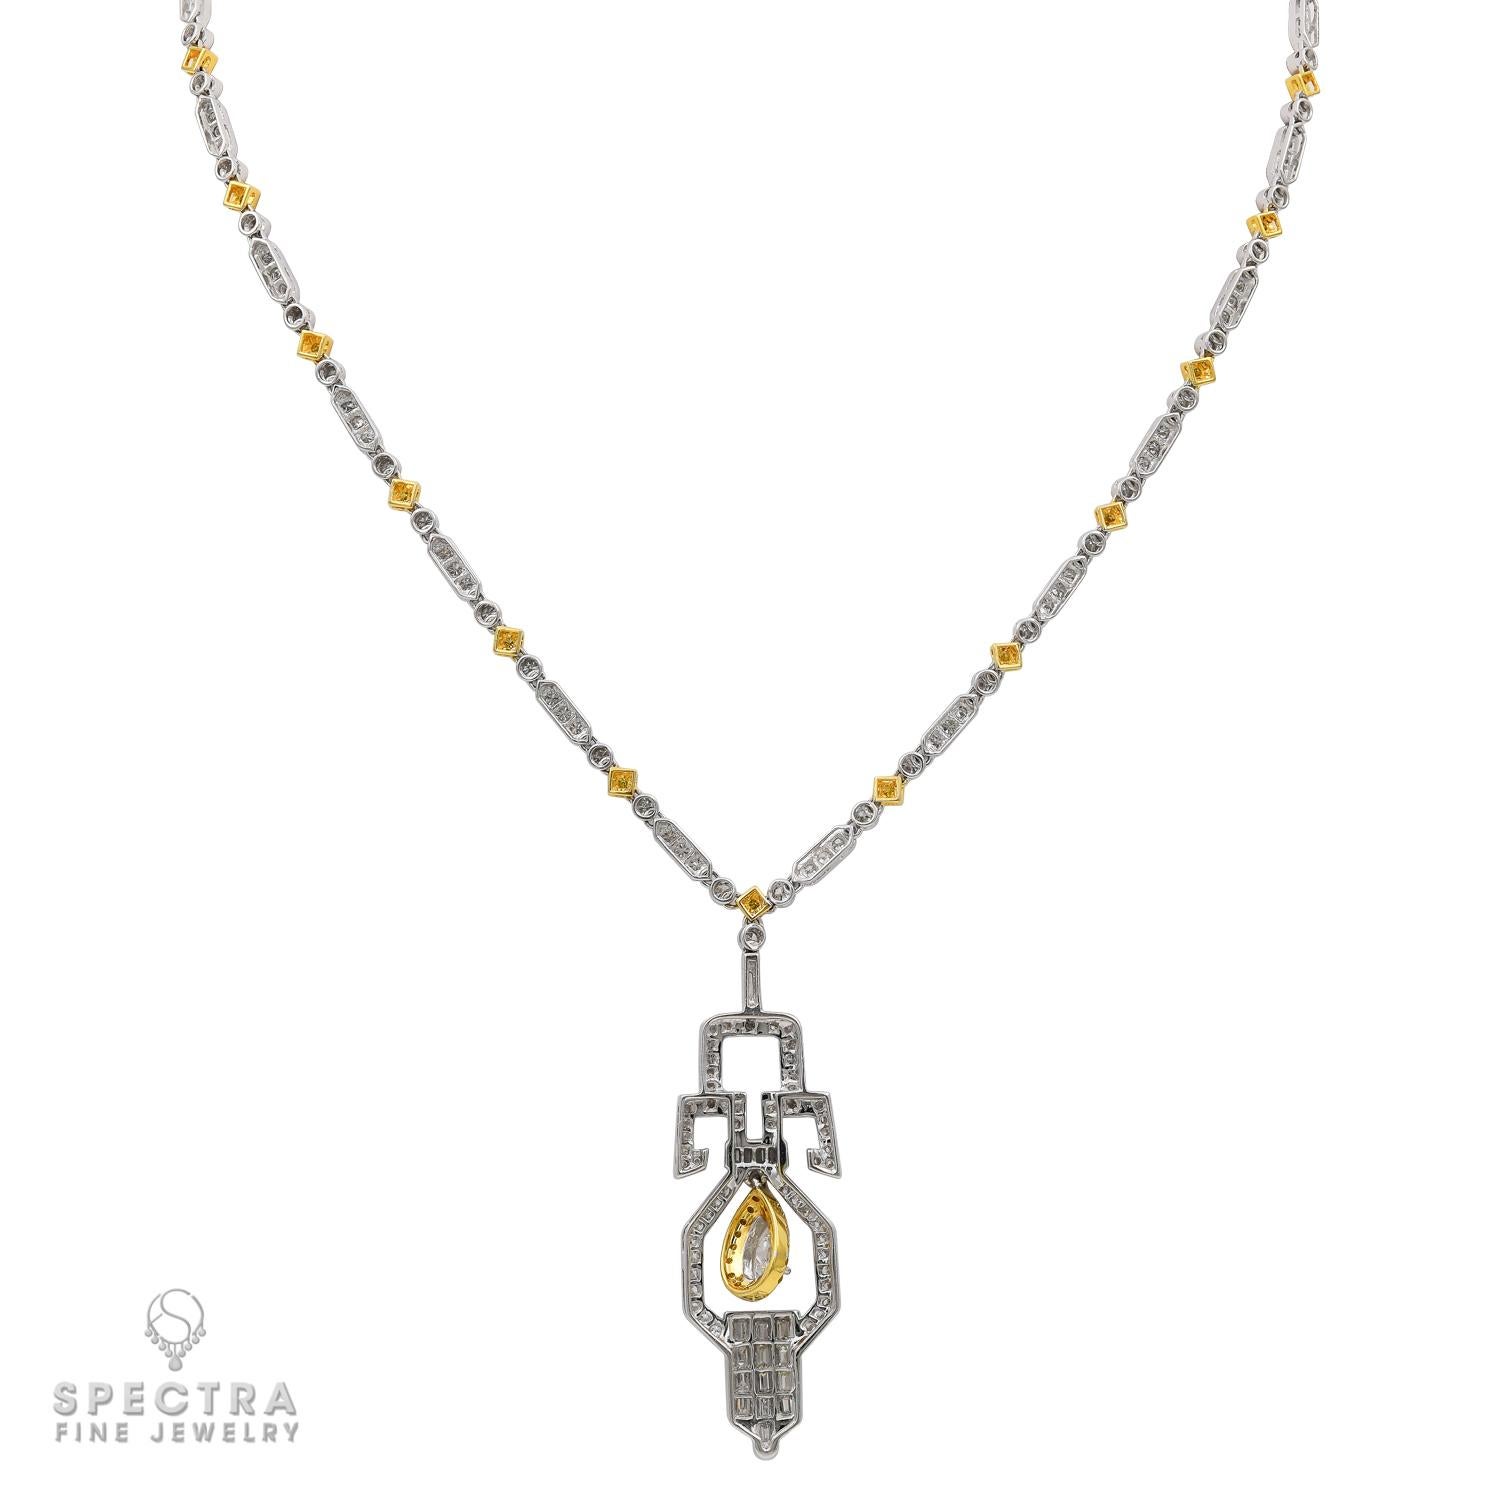 This diamond necklace has the stark simplicity, sleek lines, and geometric elements of an opulent piece from the Art Deco period; however, it is made in the 21st century, 2020. Crafted in 18K white and yellow gold; the 16.25-inch (41.28 cm) necklace